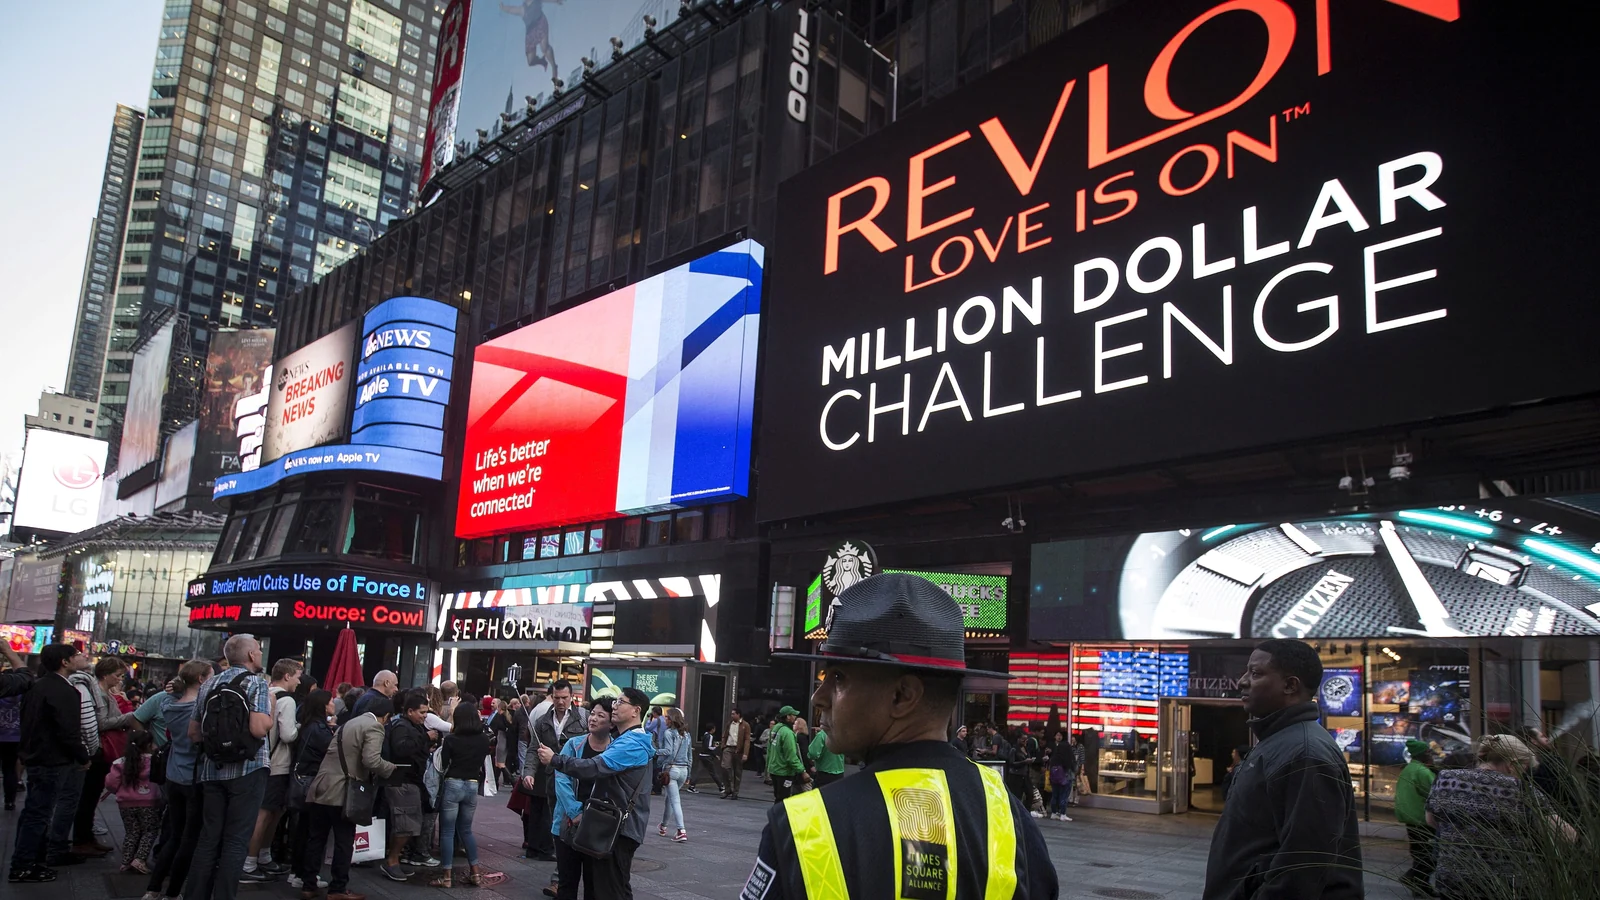 US cosmetics giant Revlon files for bankruptcy